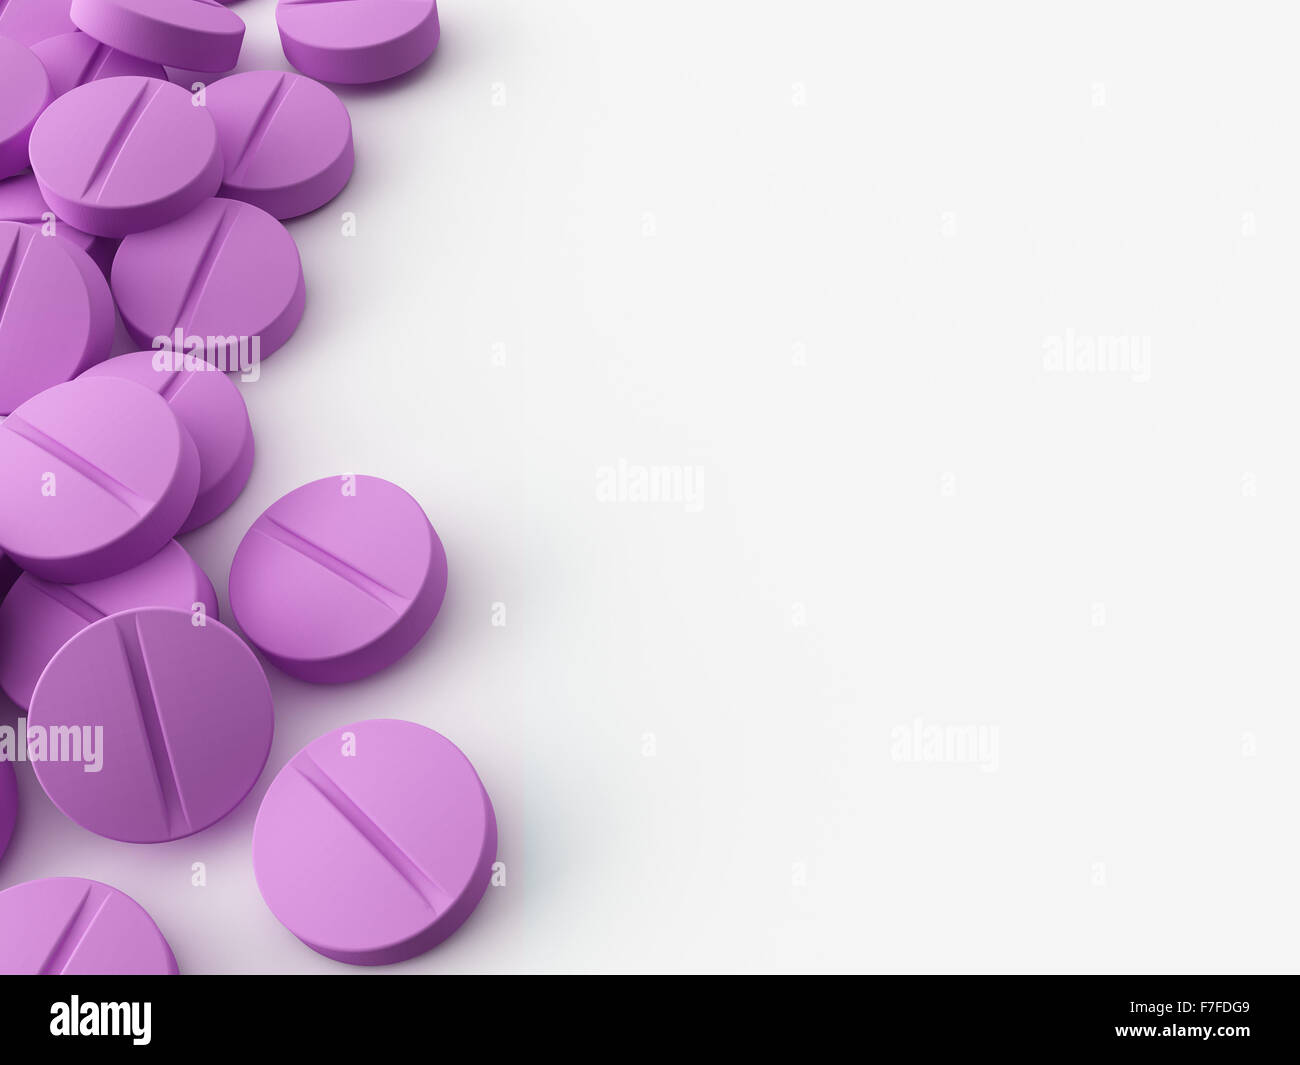 some 3d made pills on a white background Stock Photo